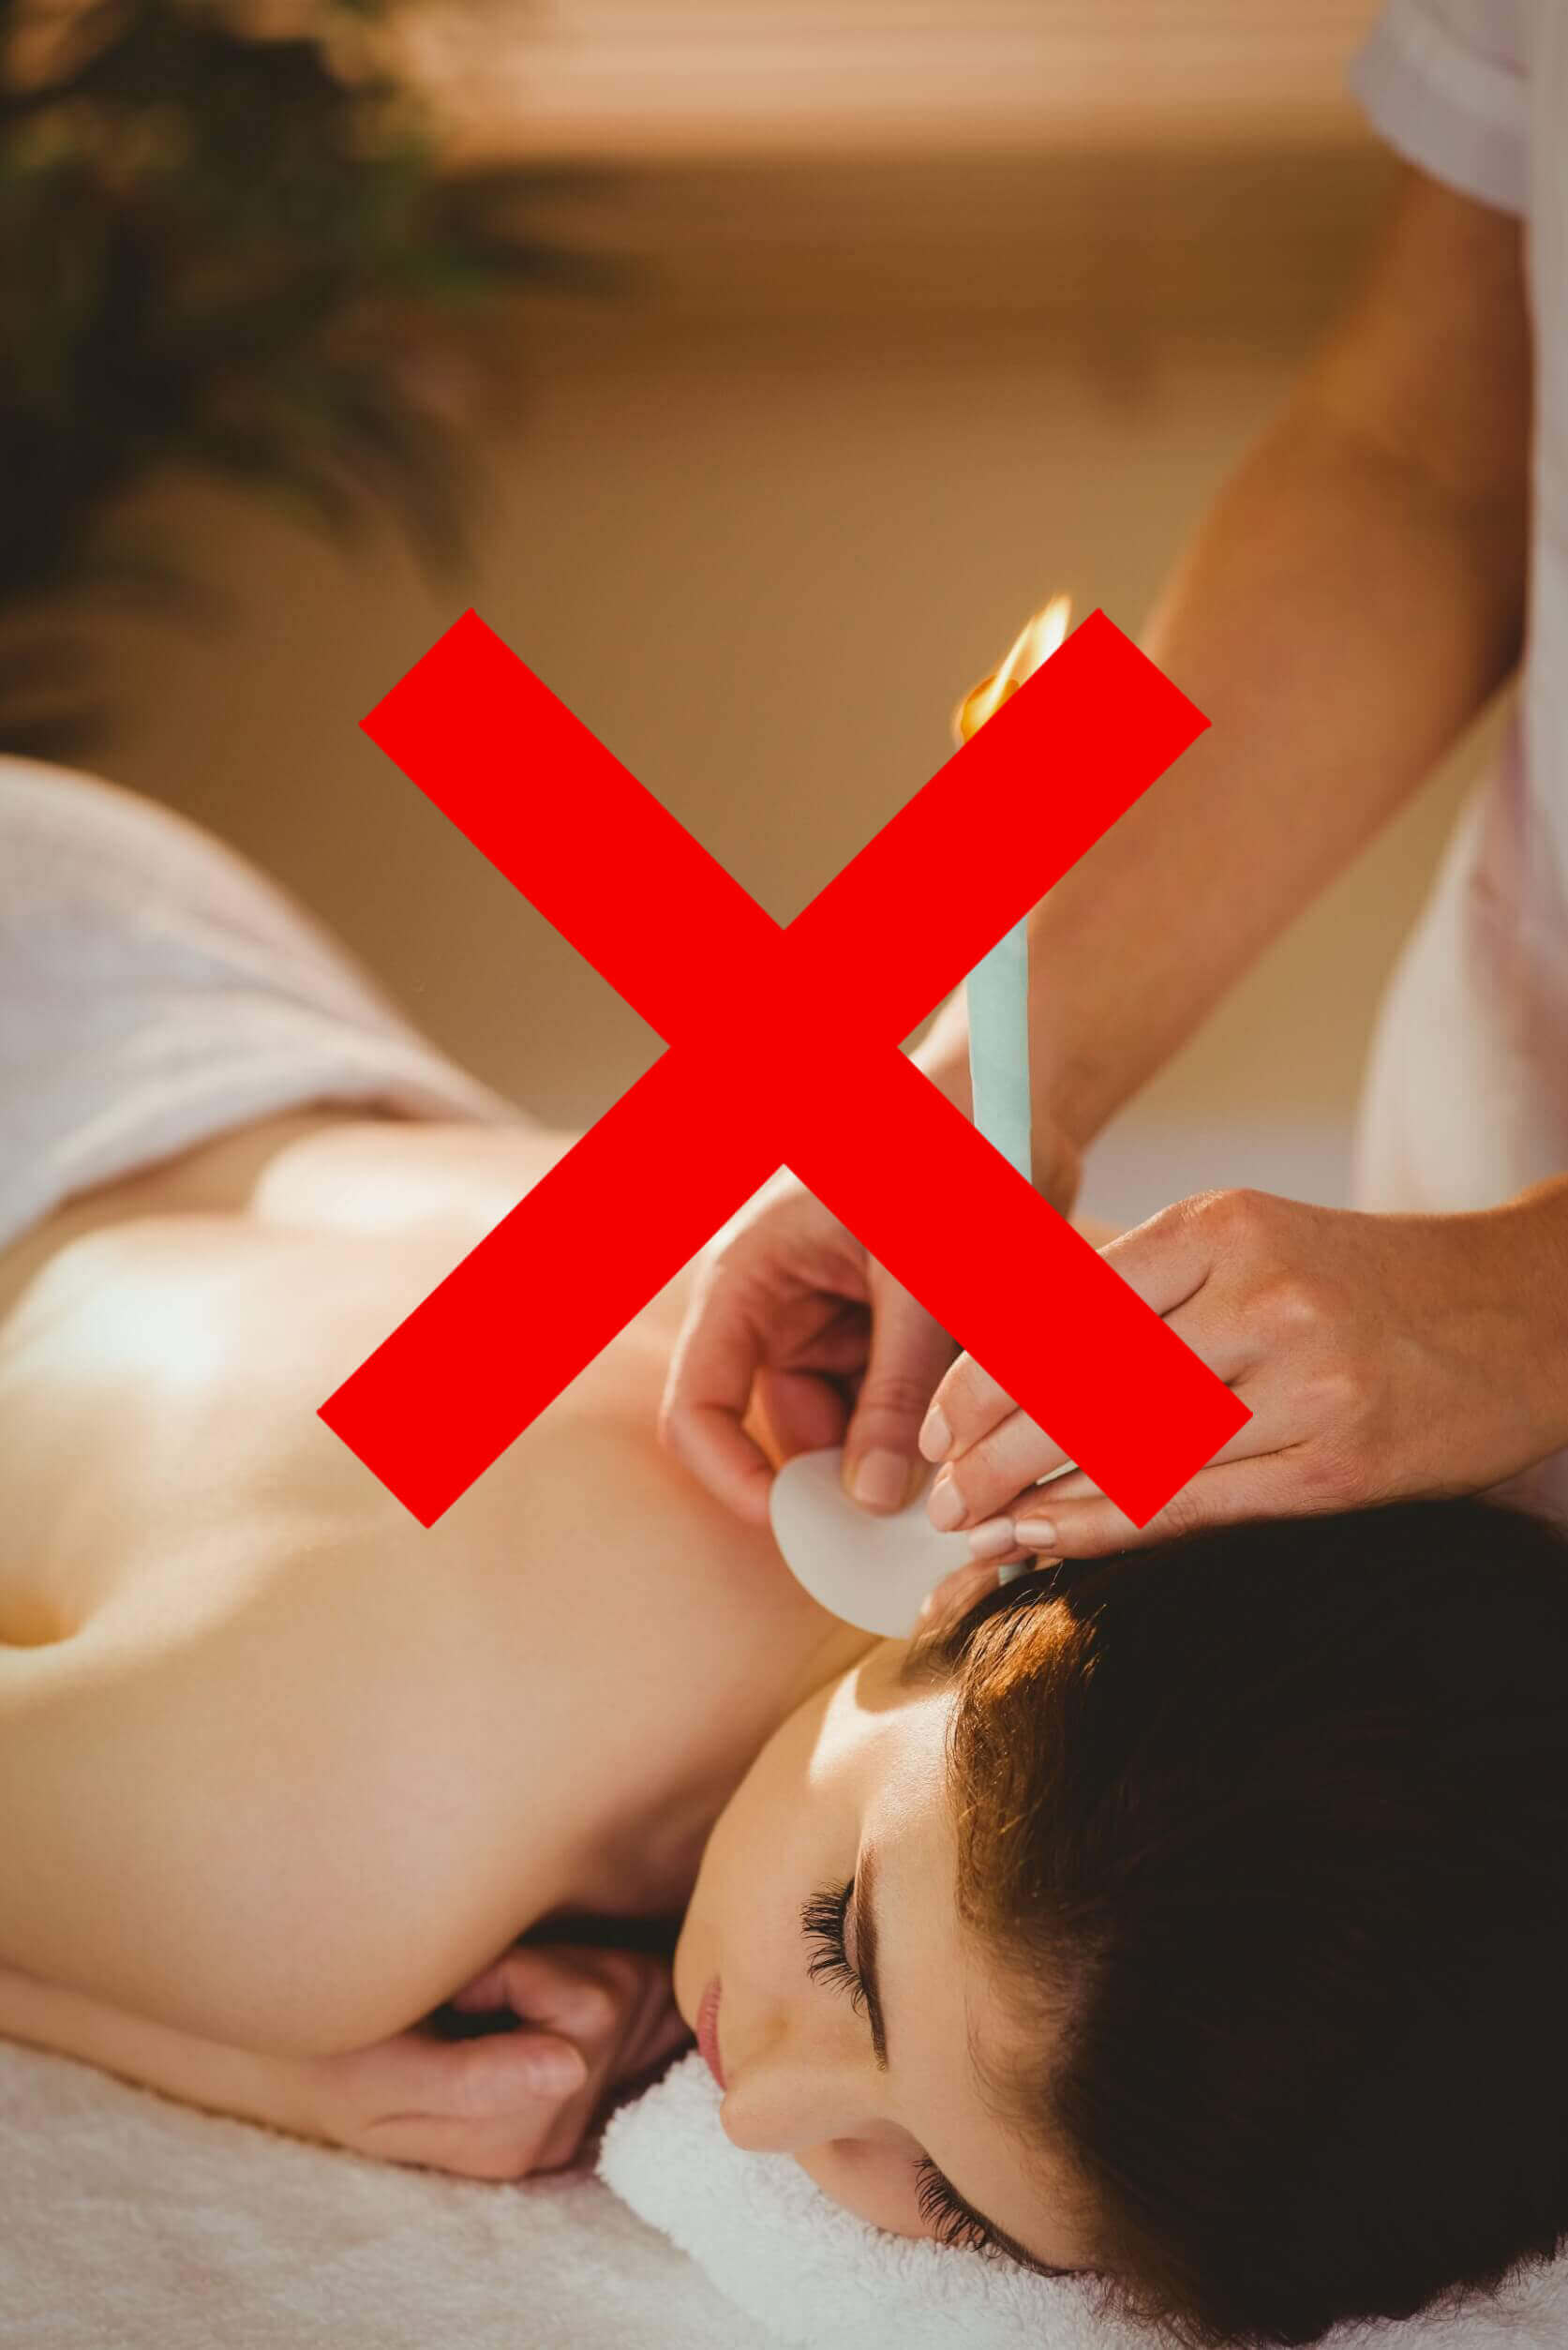 Woman using ear candling to remove earwax. There is a red x.